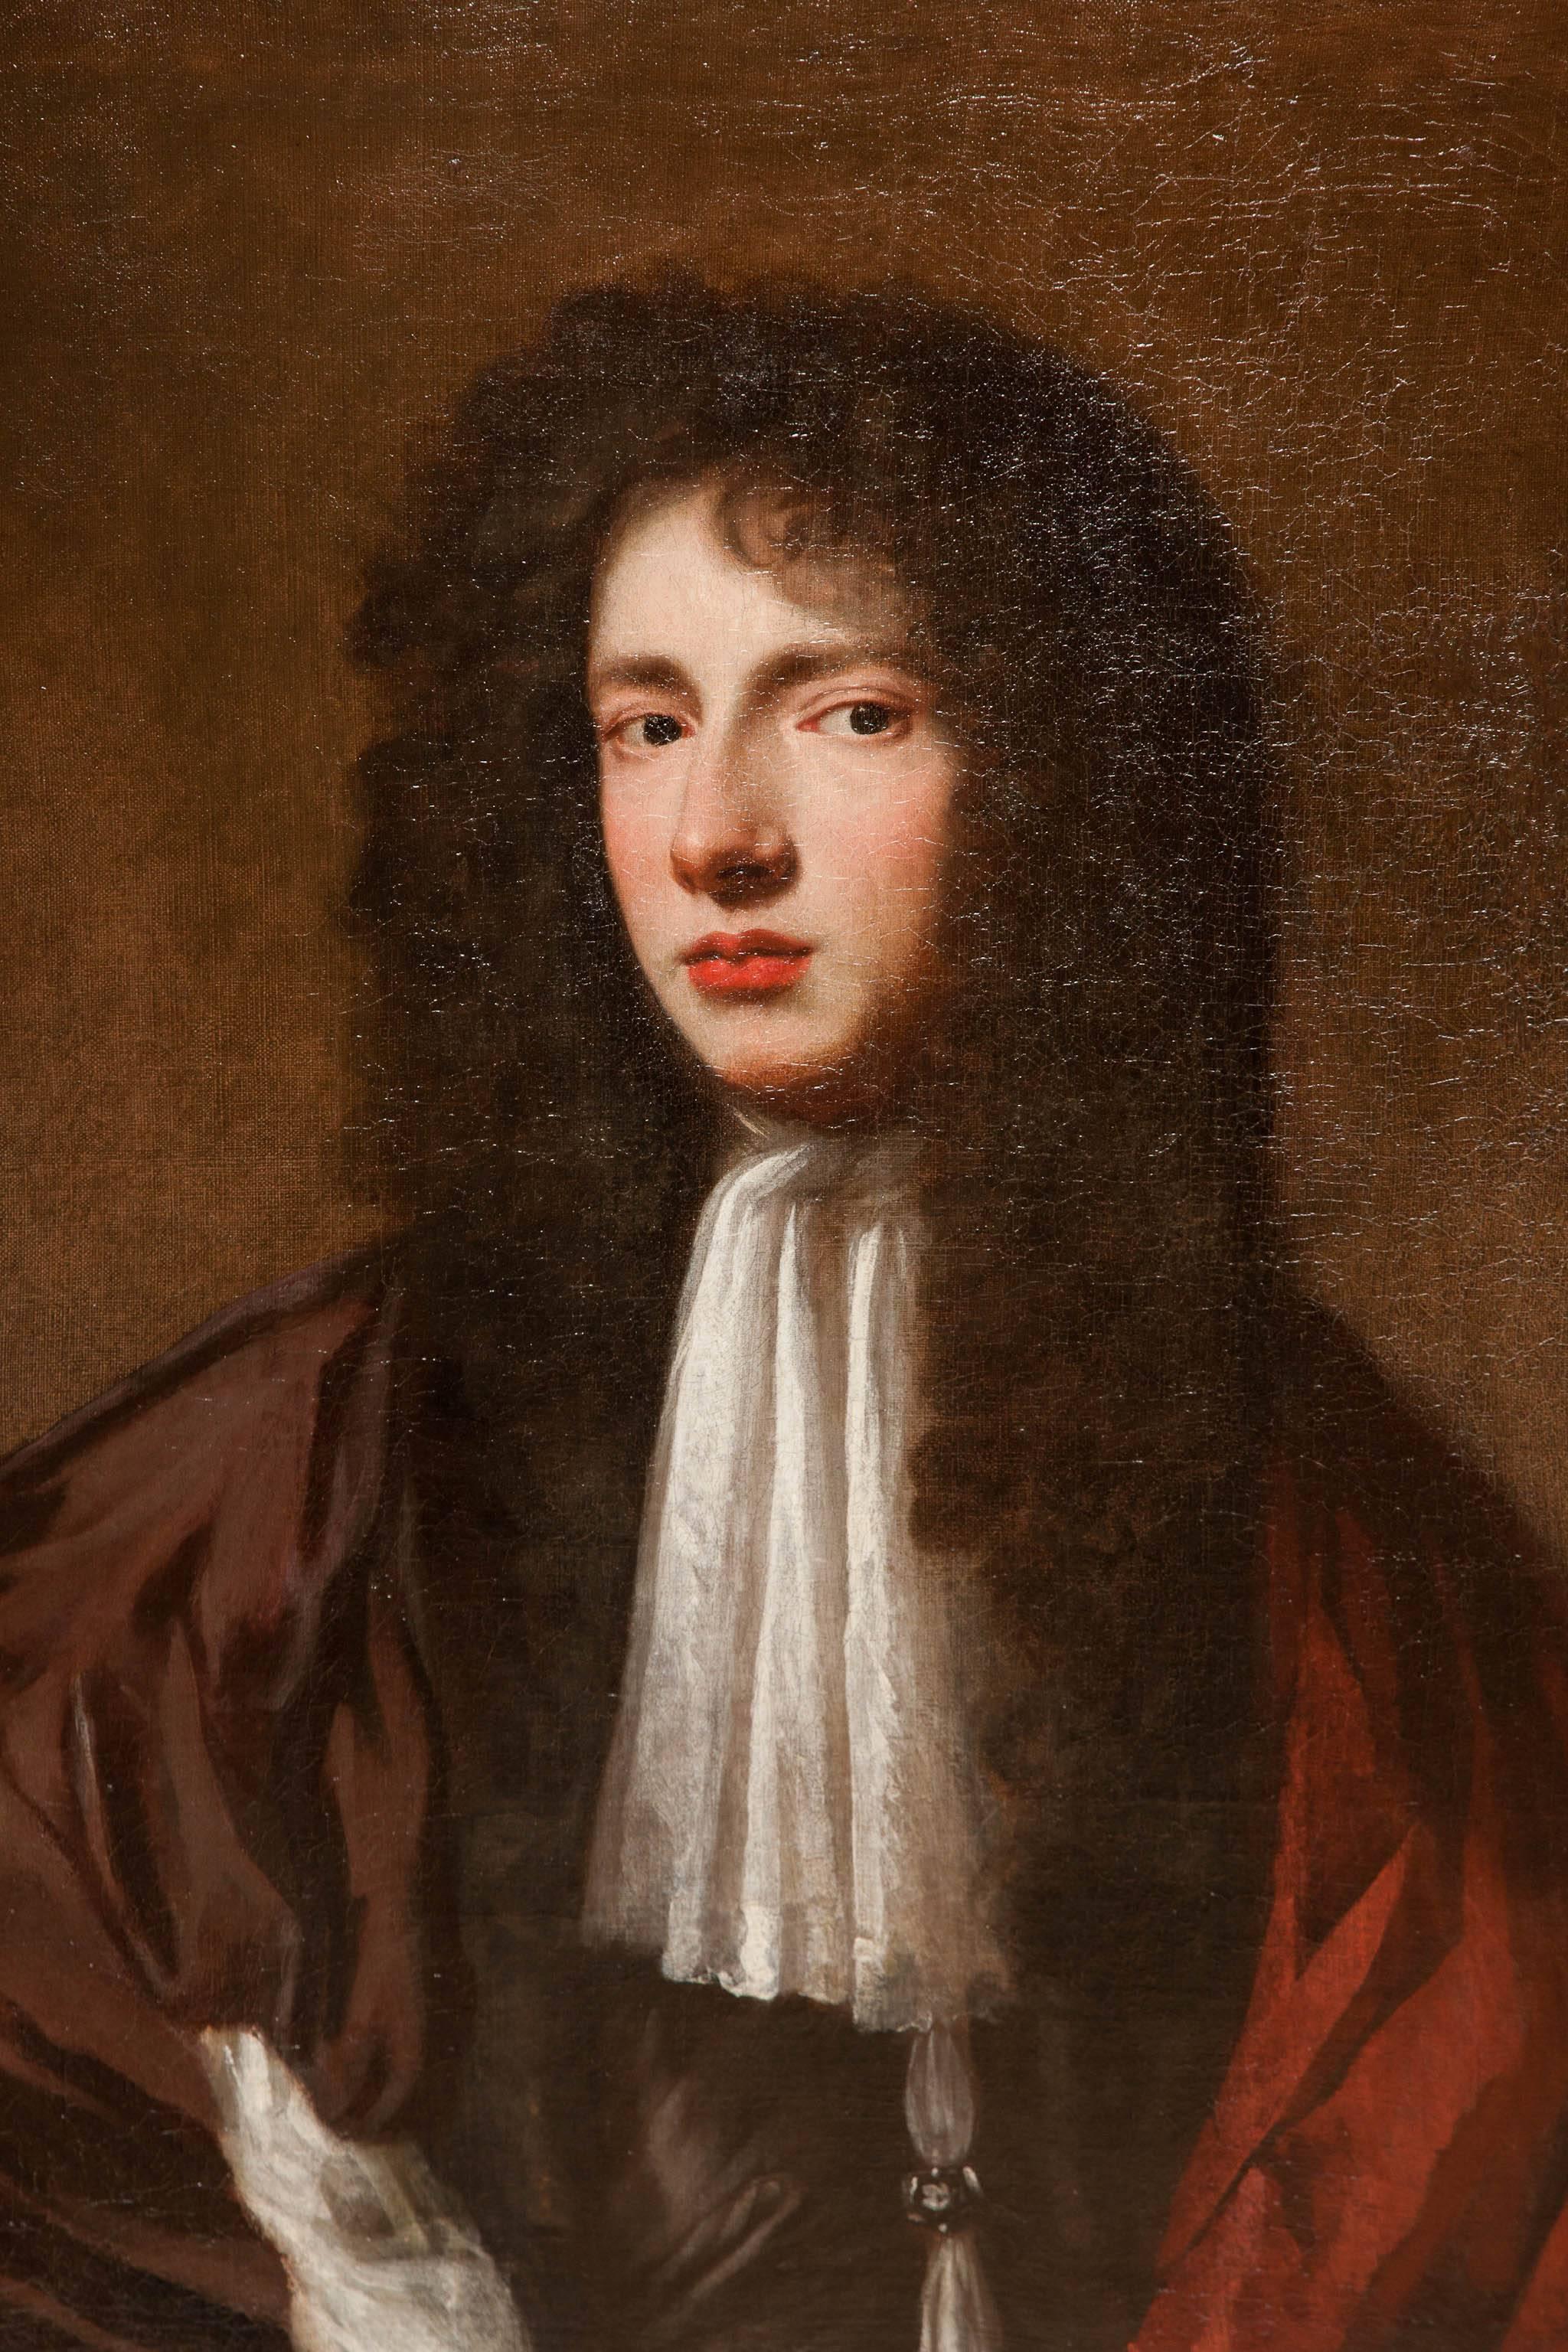 Enigmatic portrait of a young gentleman, England, circa 1680 in an original frame bolection frame. The sitter has a charming, quizzical, enigmatic expression. Possible attribution to Jacob Huysman who was active in this period. 
Good condition,